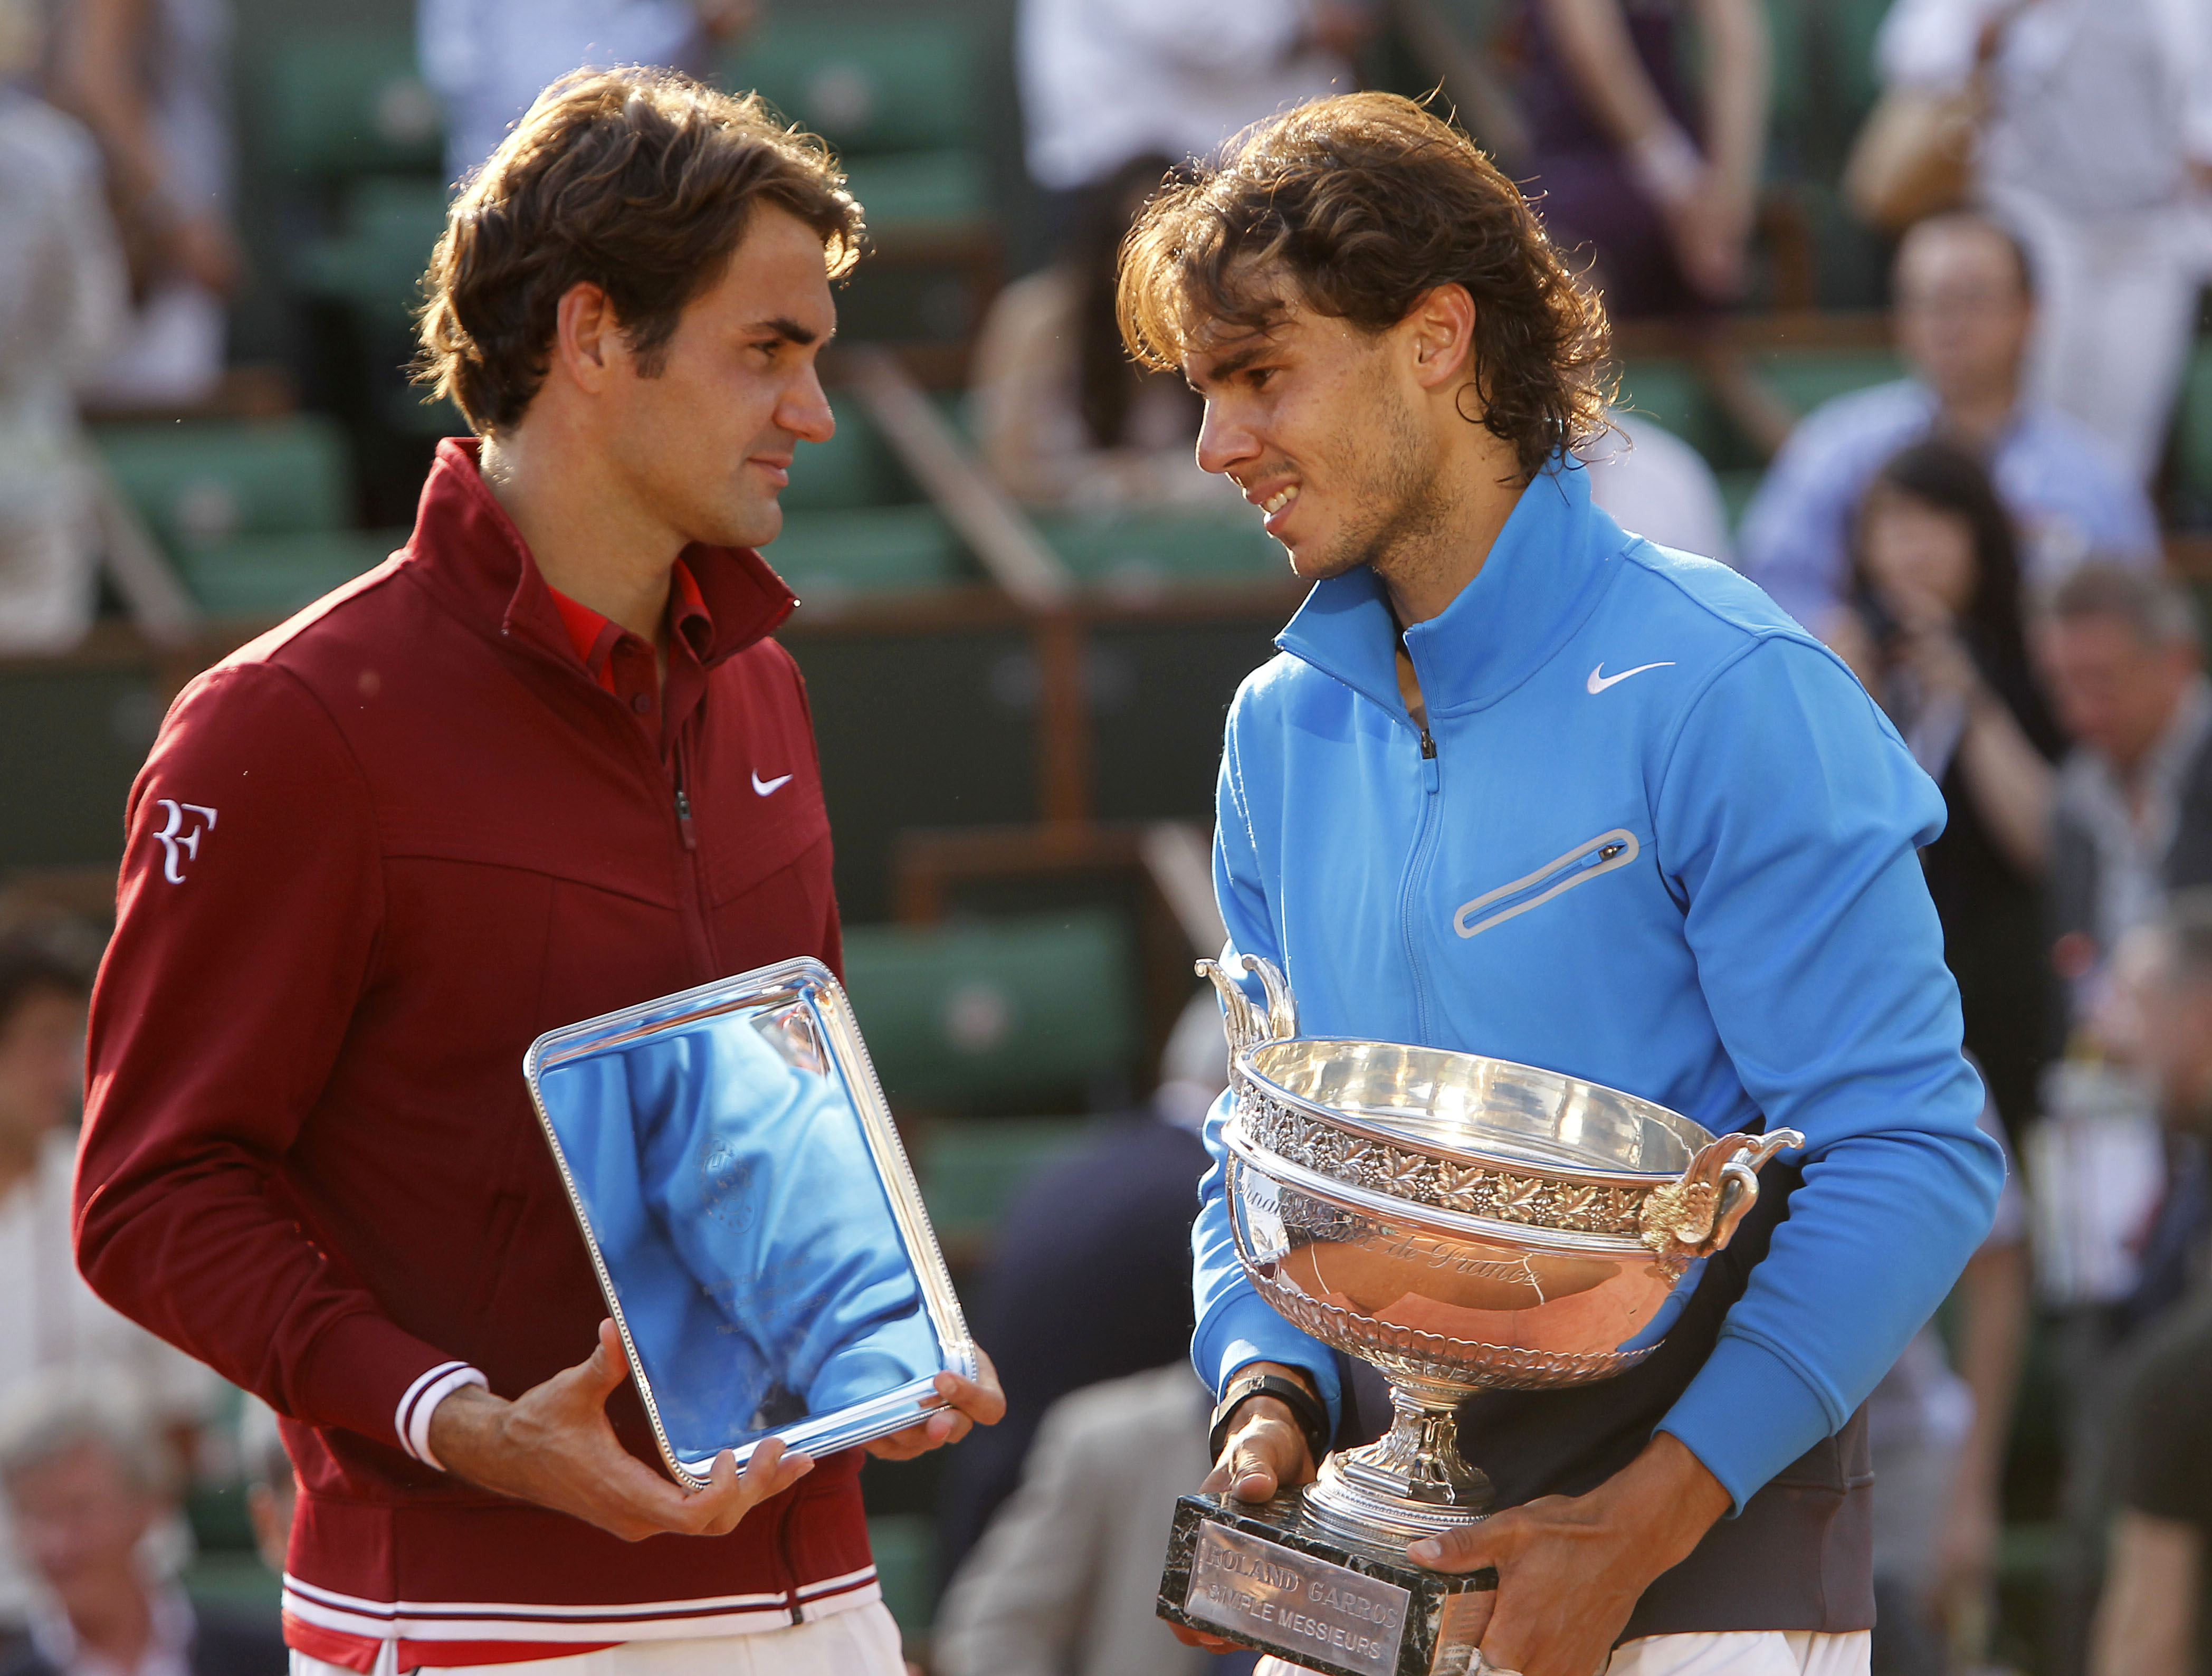 French Open 2023 No Nadal or Federer in Paris for first time since 1998; Iga Swiatek defending champ